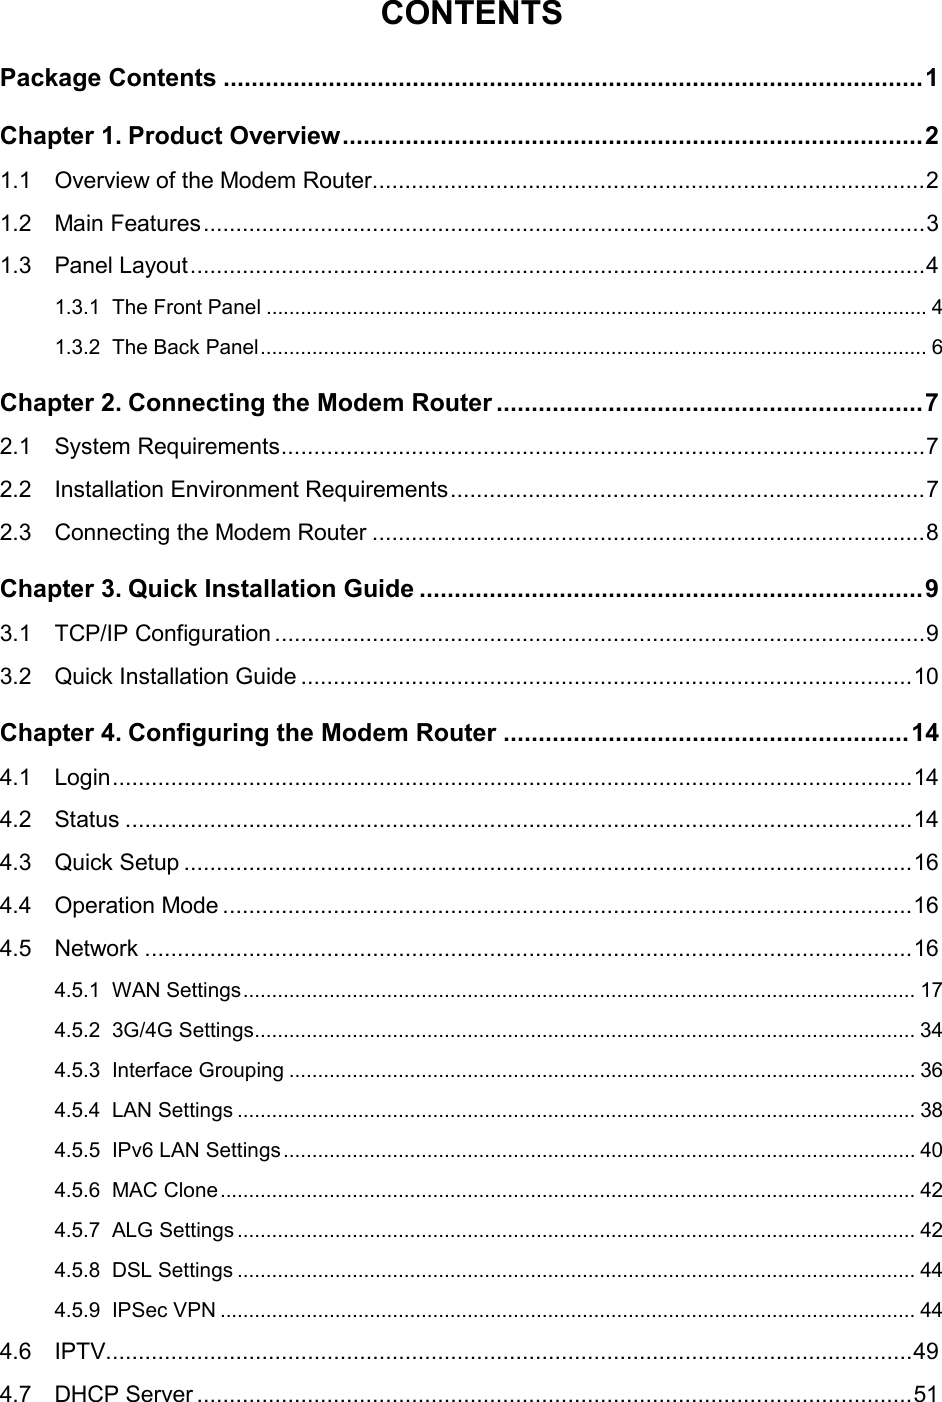  CONTENTS Package Contents .................................................................................................... 1 Chapter 1. Product Overview ................................................................................... 2 1.1 Overview of the Modem Router ..................................................................................... 2 1.2 Main Features ............................................................................................................... 3 1.3 Panel Layout ................................................................................................................. 4 1.3.1 The Front Panel ................................................................................................................... 4 1.3.2 The Back Panel .................................................................................................................... 6 Chapter 2. Connecting the Modem Router ............................................................. 7 2.1 System Requirements ................................................................................................... 7 2.2 Installation Environment Requirements ......................................................................... 7 2.3 Connecting the Modem Router ..................................................................................... 8 Chapter 3. Quick Installation Guide ........................................................................ 9 3.1 TCP/IP Configuration .................................................................................................... 9 3.2 Quick Installation Guide .............................................................................................. 10 Chapter 4. Configuring the Modem Router .......................................................... 14 4.1 Login ........................................................................................................................... 14 4.2 Status ......................................................................................................................... 14 4.3 Quick Setup ................................................................................................................ 16 4.4 Operation Mode .......................................................................................................... 16 4.5 Network ...................................................................................................................... 16 4.5.1 WAN Settings ..................................................................................................................... 17 4.5.2 3G/4G Settings................................................................................................................... 34 4.5.3 Interface Grouping ............................................................................................................. 36 4.5.4 LAN Settings ...................................................................................................................... 38 4.5.5 IPv6 LAN Settings .............................................................................................................. 40 4.5.6 MAC Clone ......................................................................................................................... 42 4.5.7 ALG Settings ...................................................................................................................... 42 4.5.8 DSL Settings ...................................................................................................................... 44 4.5.9 IPSec VPN ......................................................................................................................... 44 4.6 IPTV............................................................................................................................ 49 4.7 DHCP Server .............................................................................................................. 51  